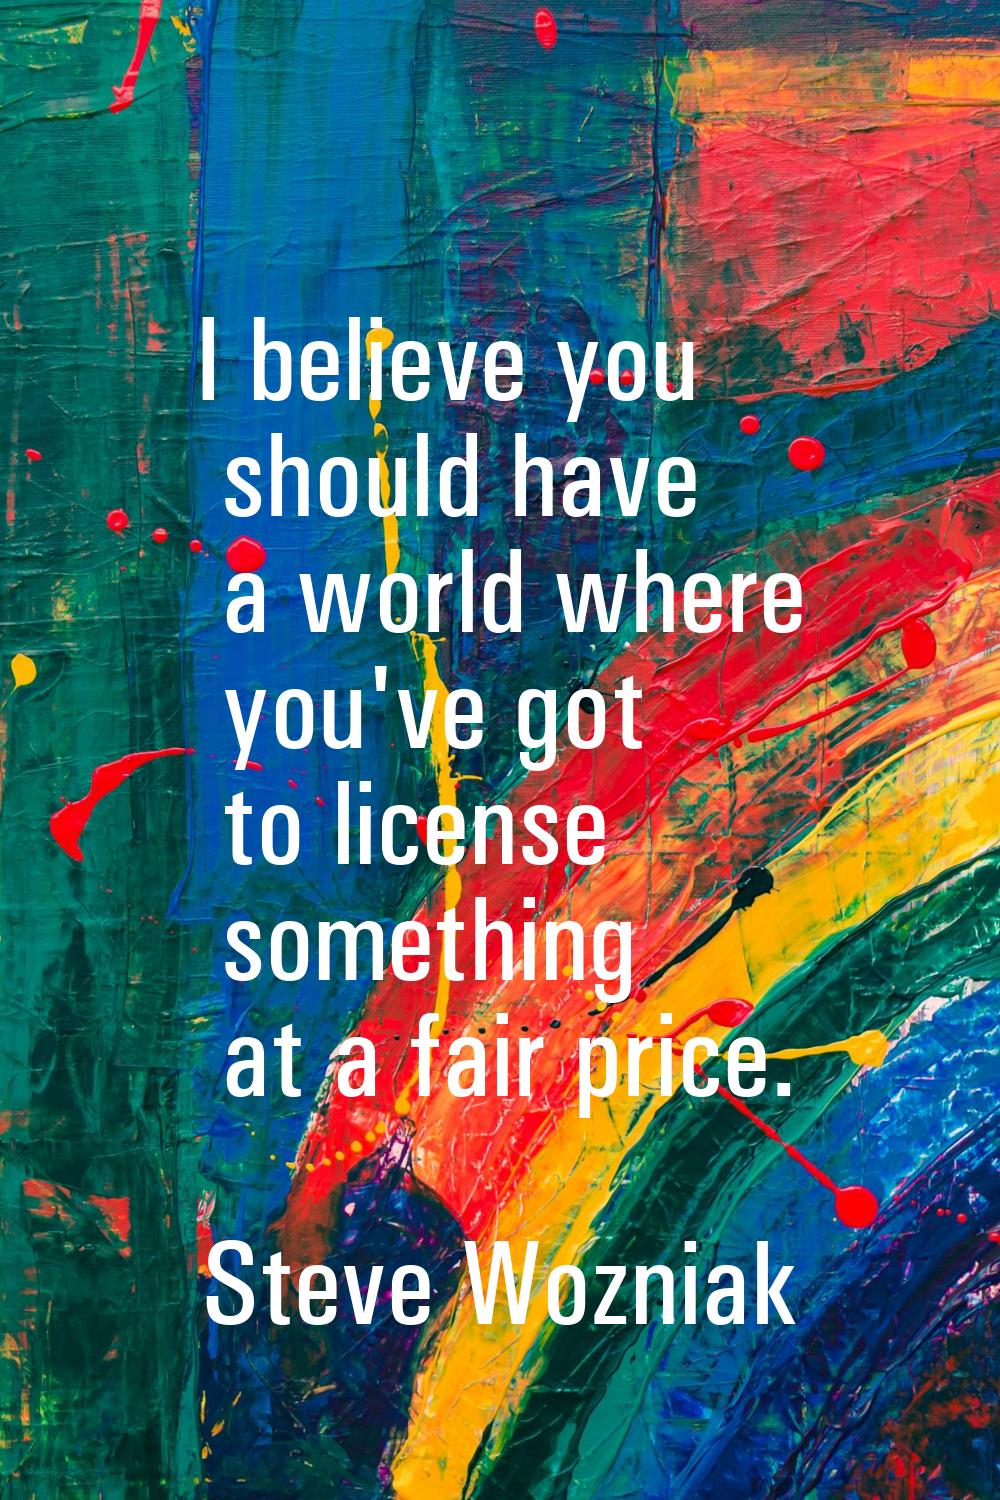 I believe you should have a world where you've got to license something at a fair price.